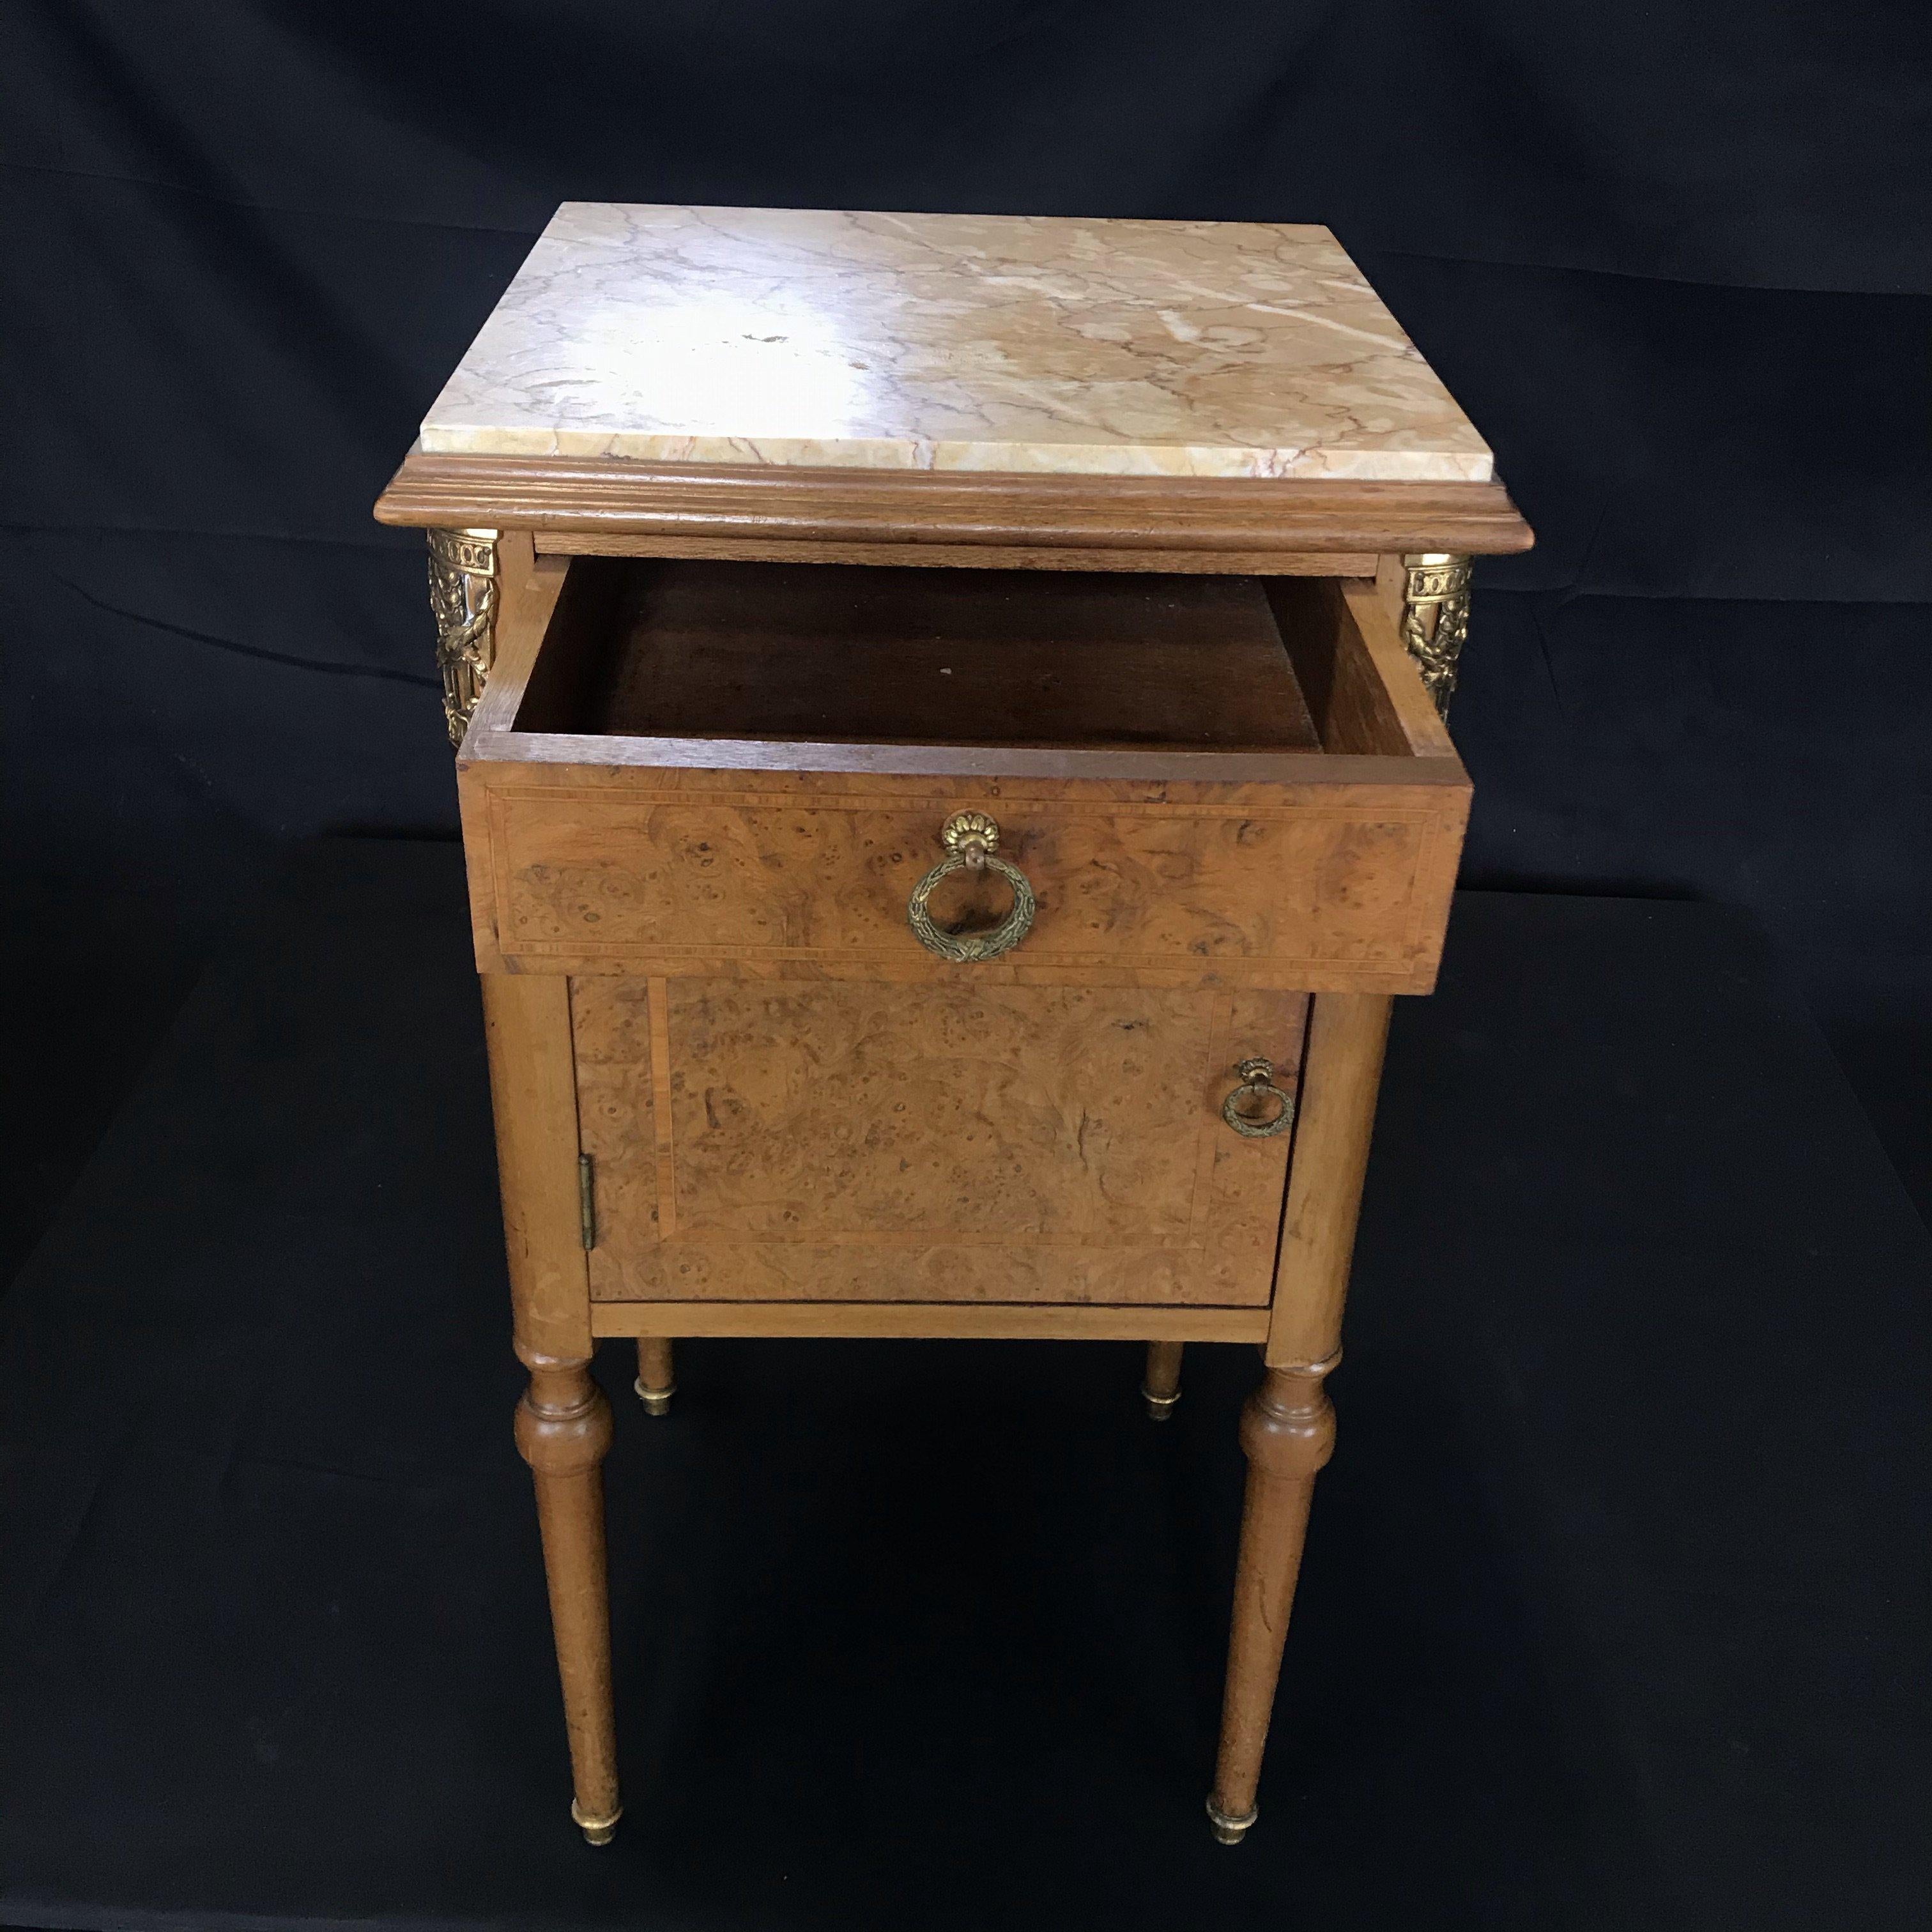 Much versatility in this beautiful inlaid French marble top night stand, bedside table or side table. Lovely inlay on the front under a beige ivory marble top, with one dovetailed drawer and an open cabinet below. Perfect in a bedroom, bathroom or